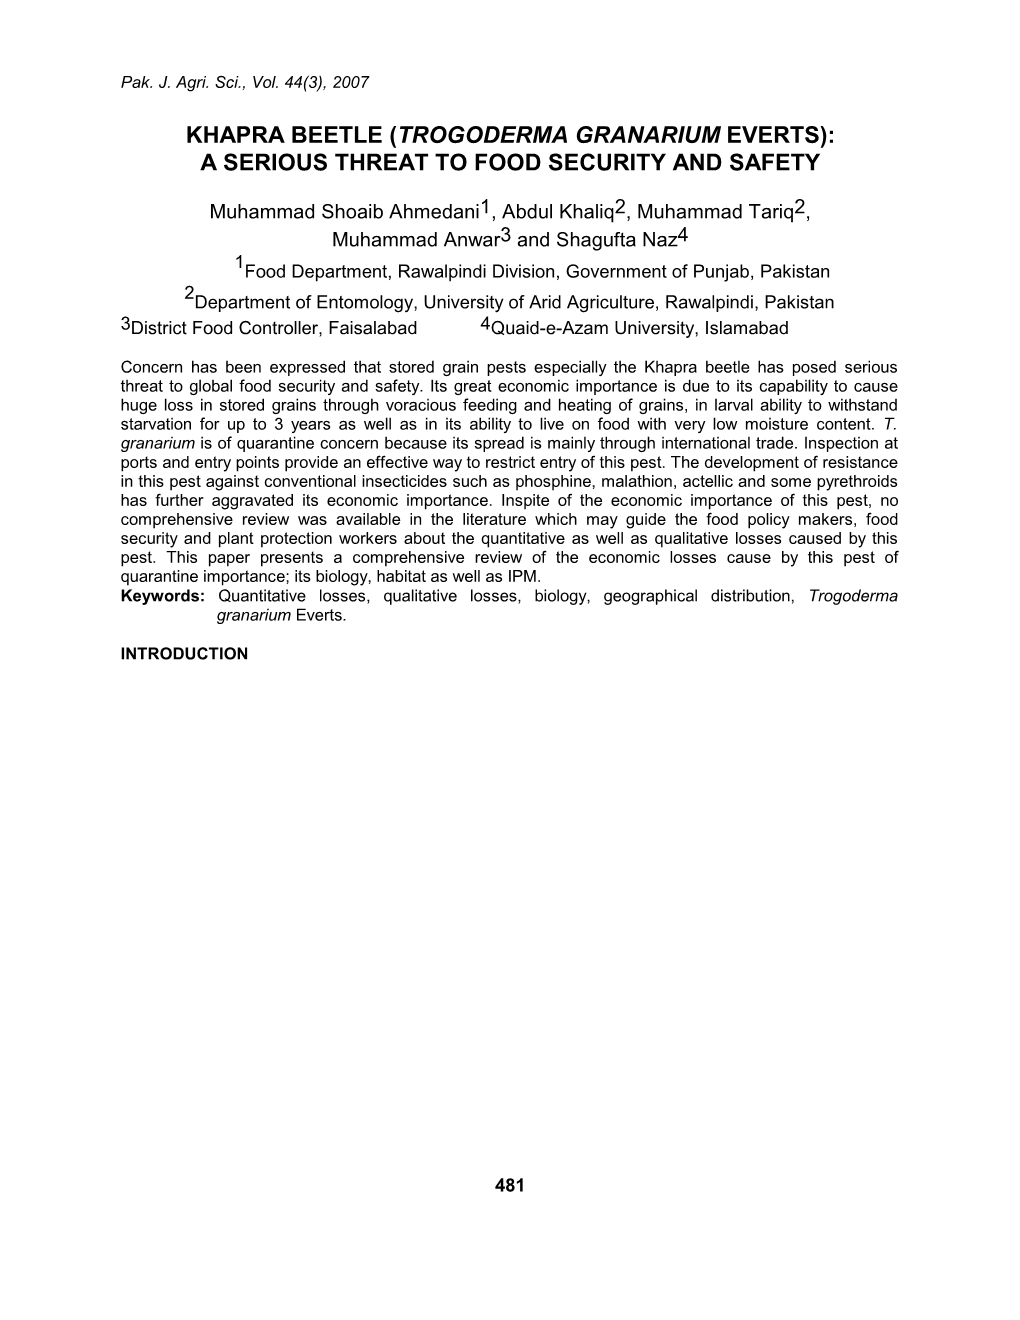 Trogoderma Granarium Everts): a Serious Threat to Food Security and Safety